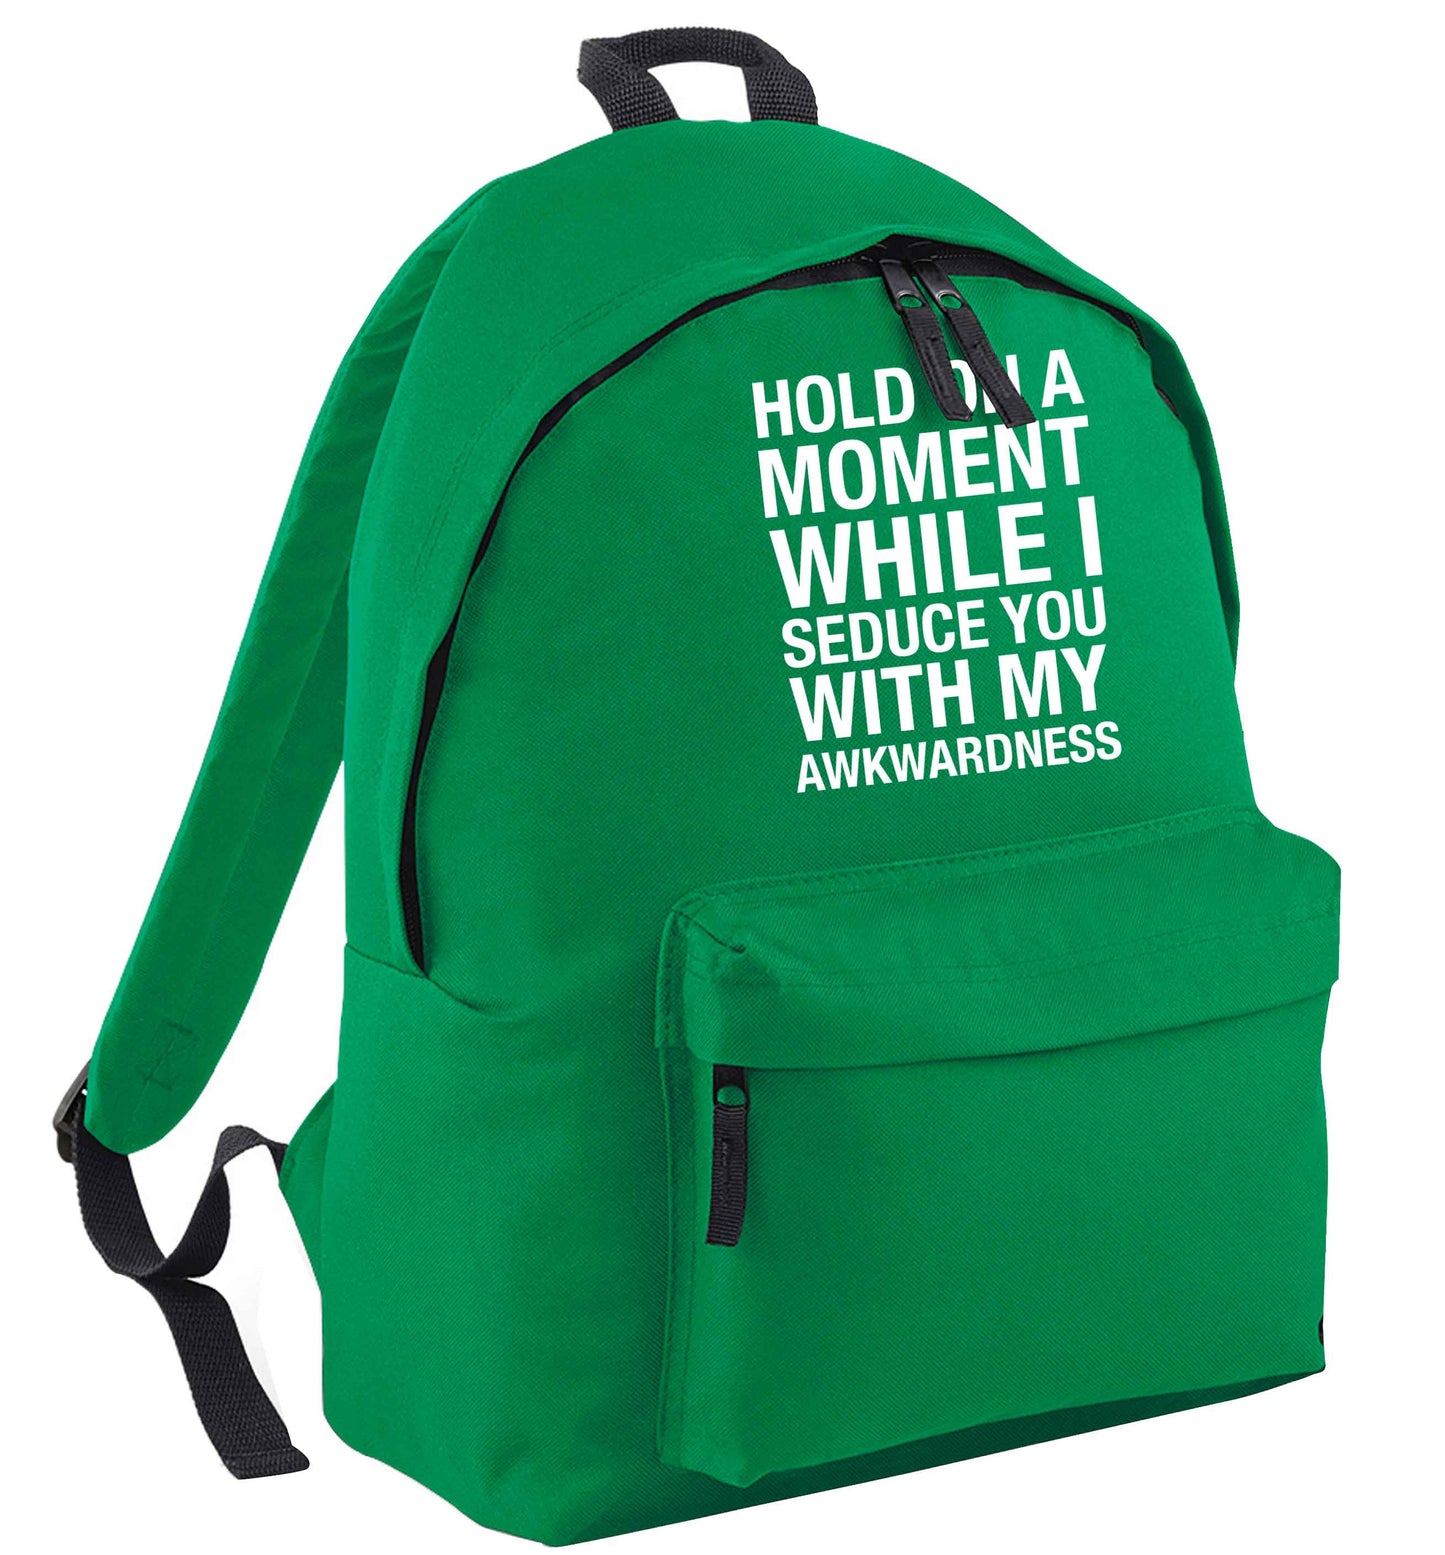 Hold on a moment while I seduce you with my awkwardness green adults backpack